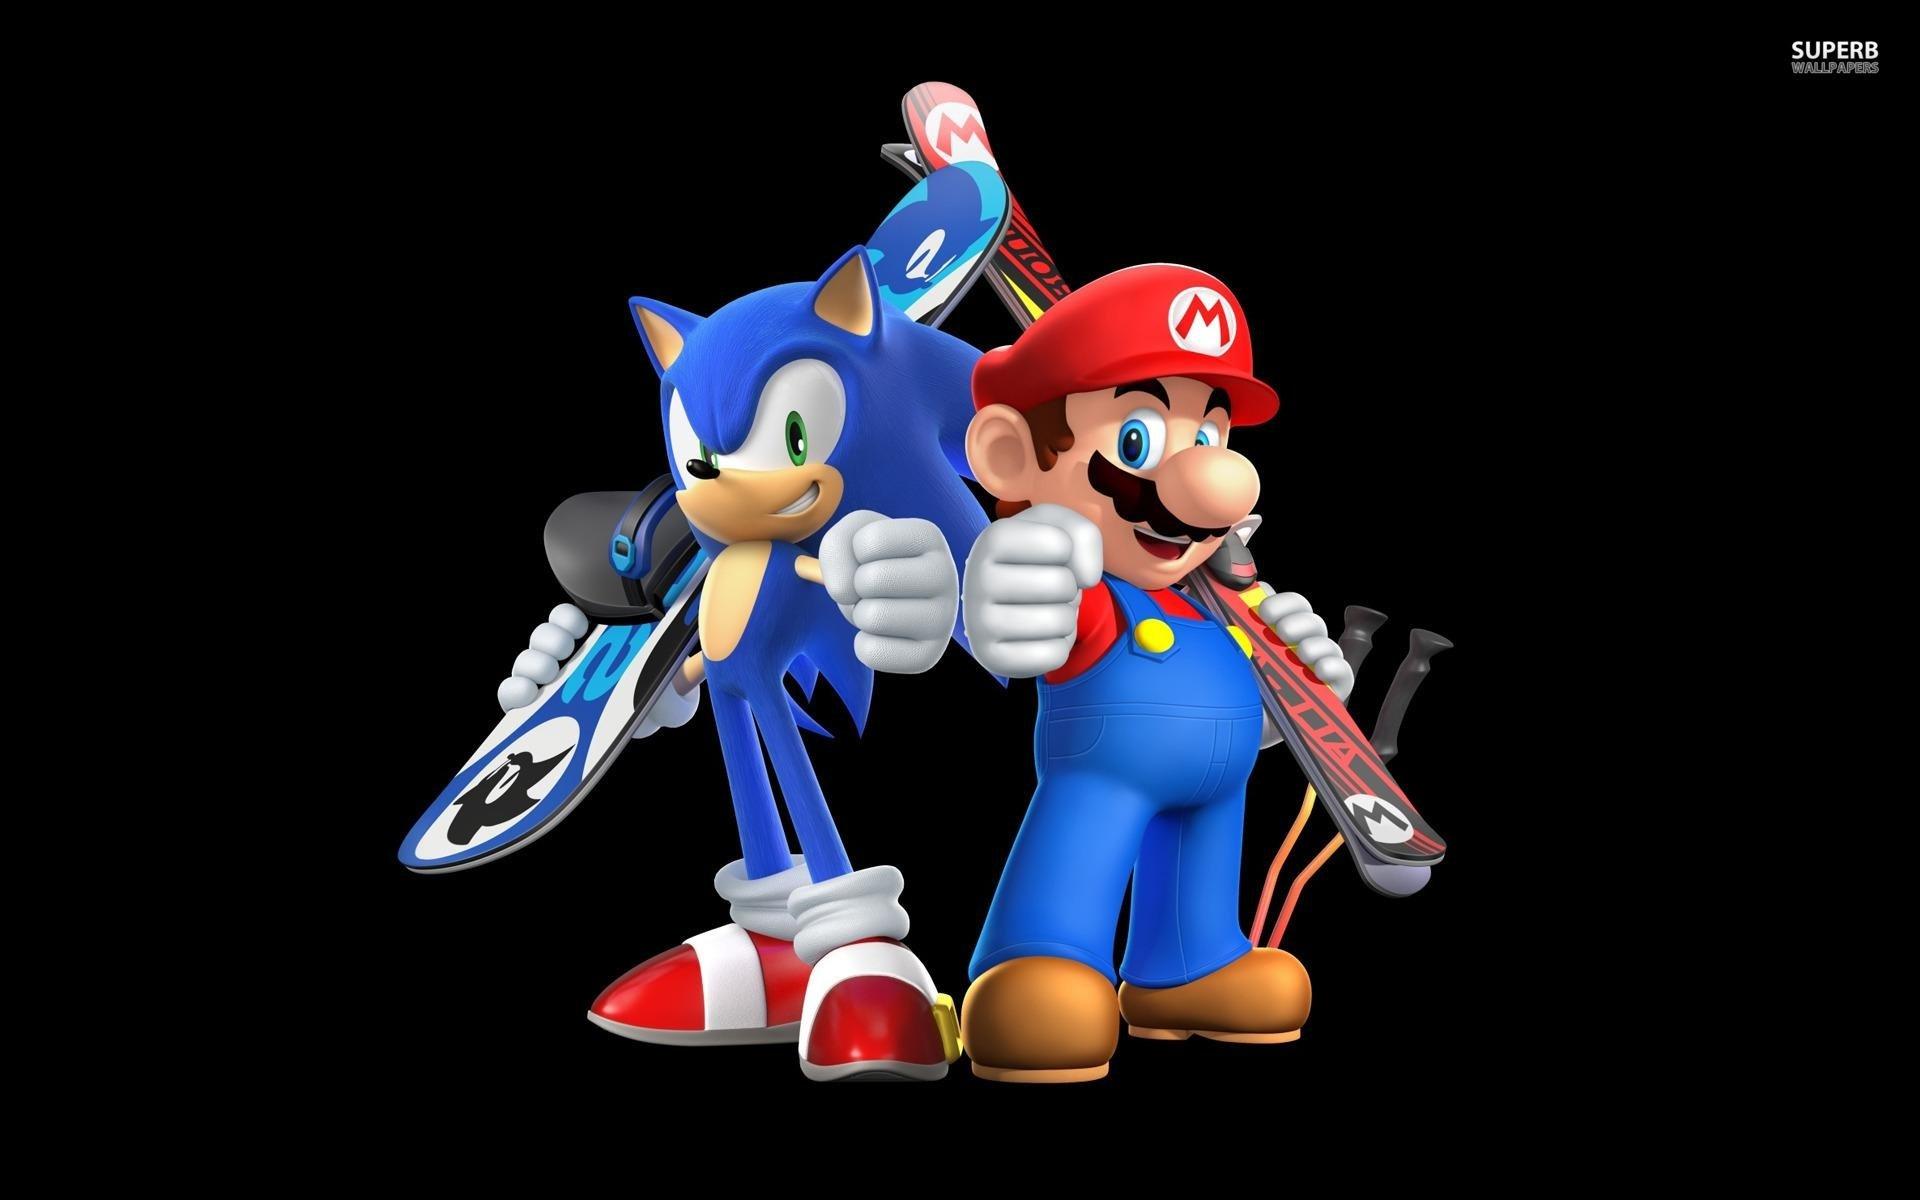 Mario & Sonic: Mario and Sonic at the Olympic Winter Games